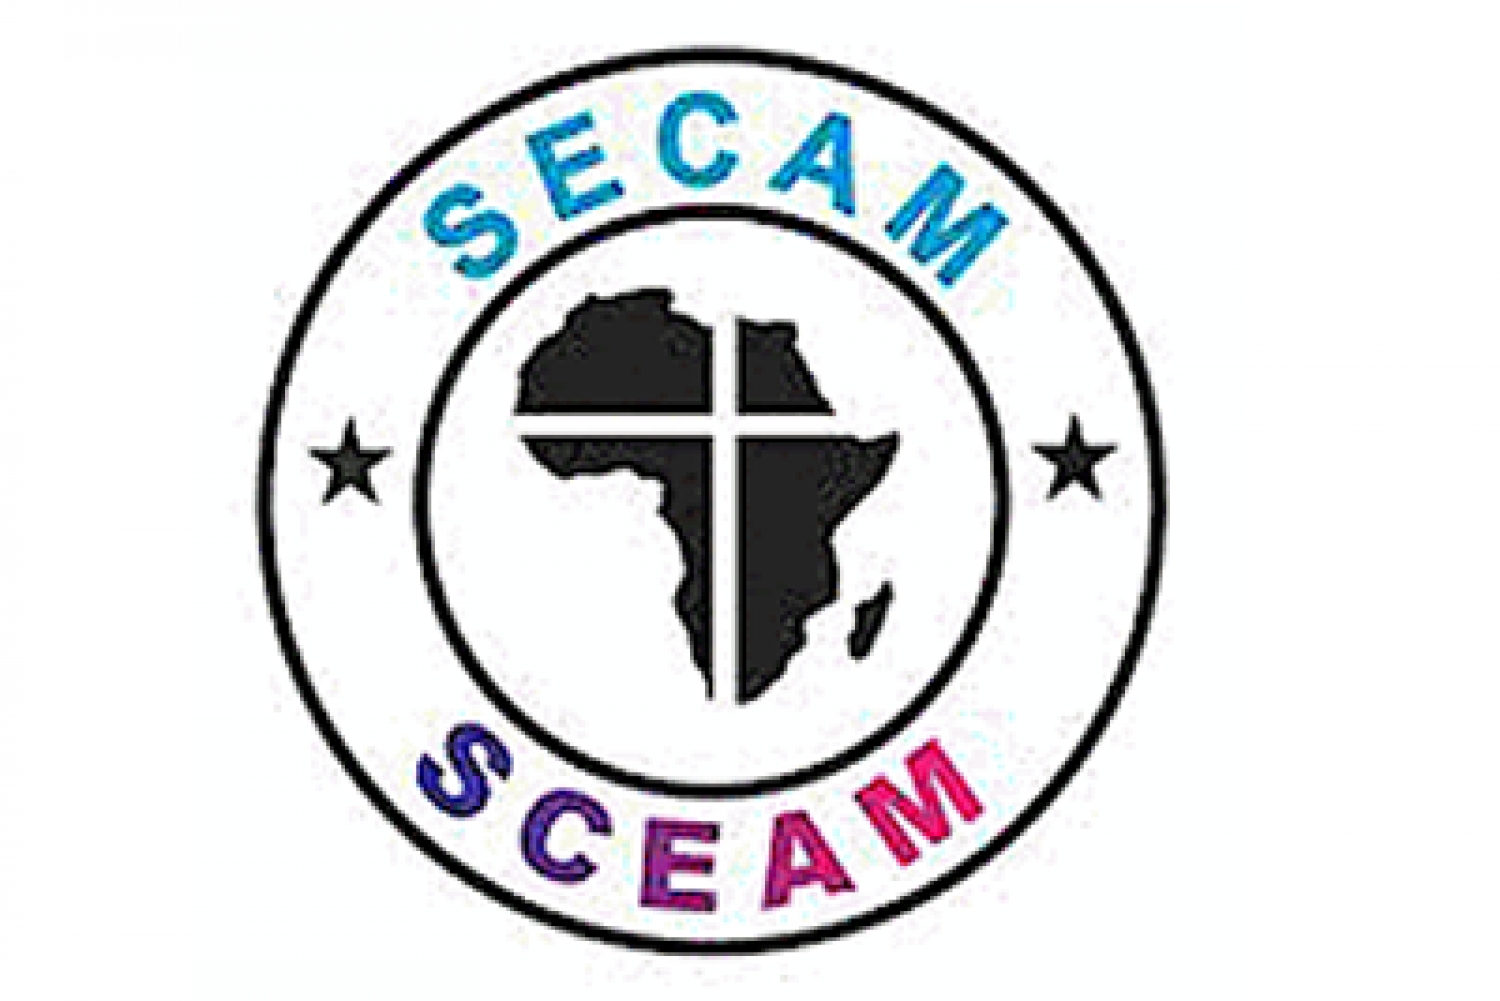 ANNUAL CELEBRATION OF SECAM DAY 2020  (29TH JULY AND 2ND AUGUST 2020)